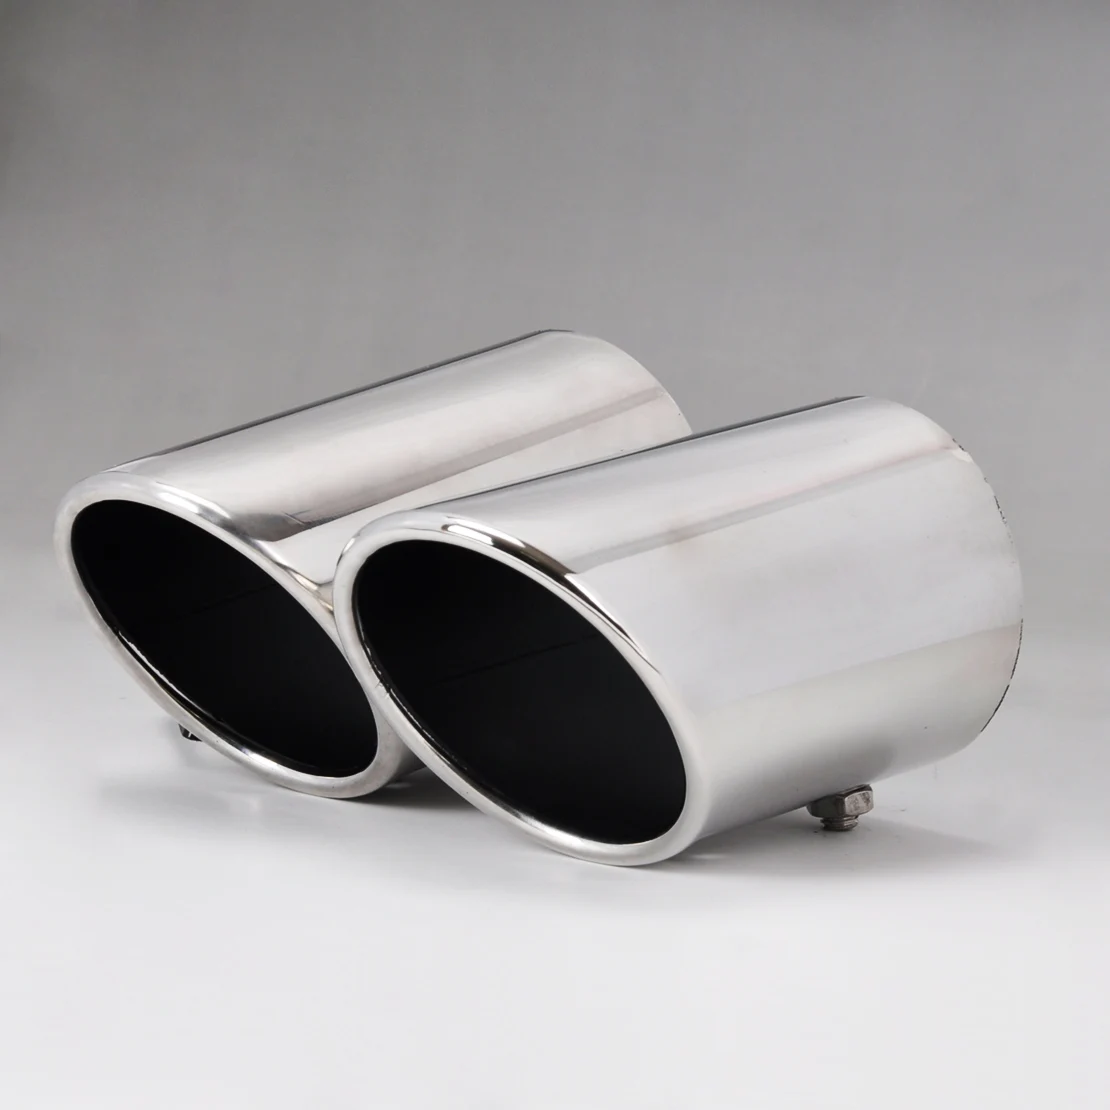 Dwcx 2x Stainless Steel Exhaust Tail Rear Muffler T Tip Pipe Tailpipe For Vw Pat - £203.37 GBP